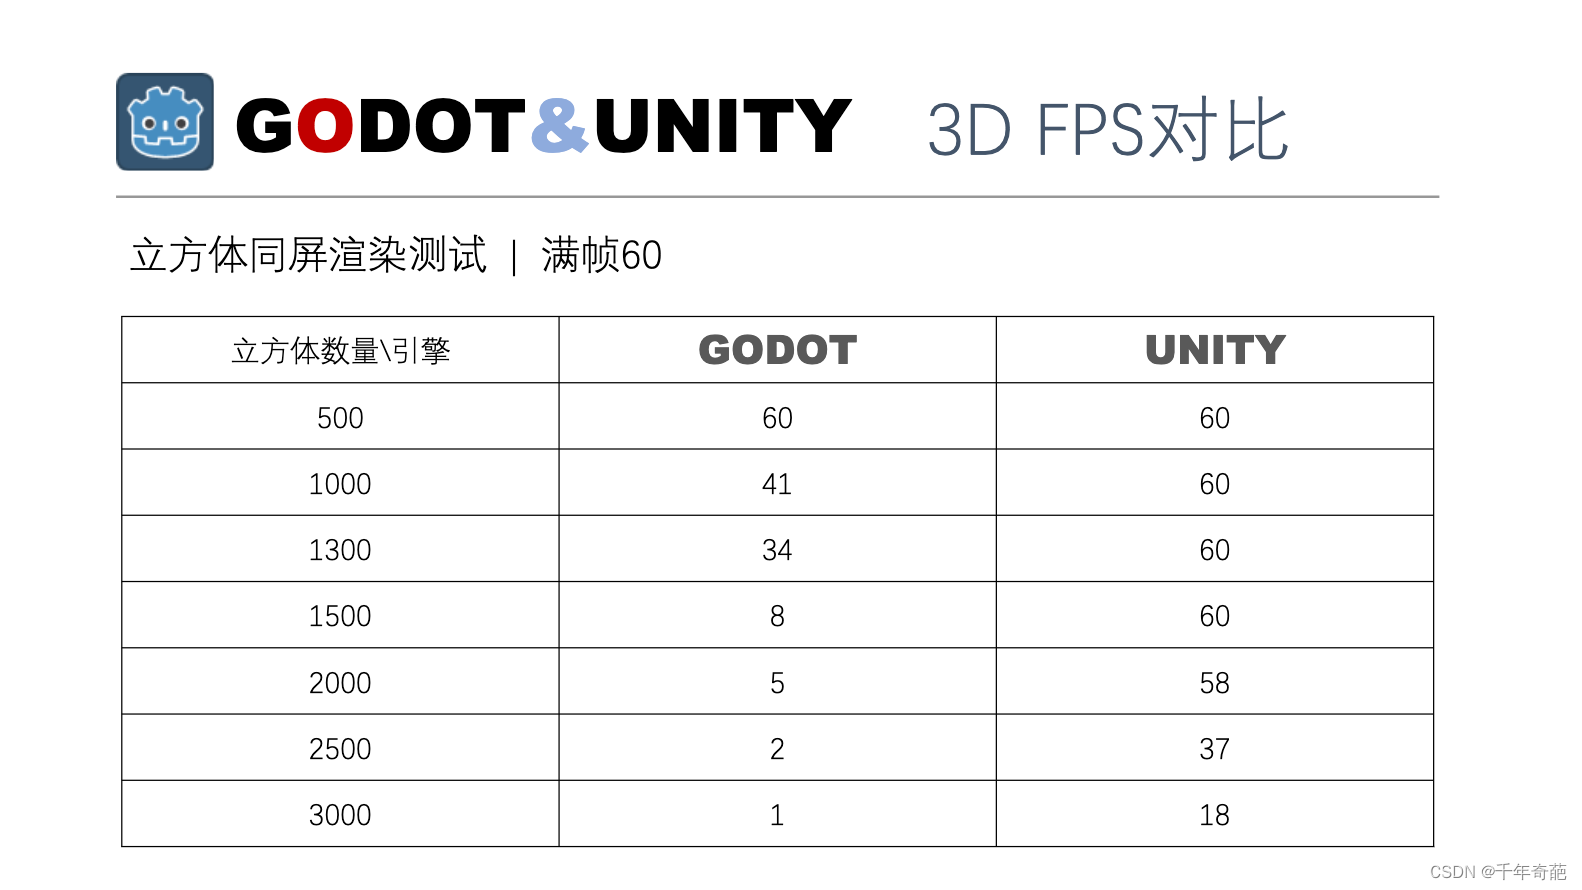 Introduction to GODOT game engine, including performance comparison test with unity, as well as selection recommendations